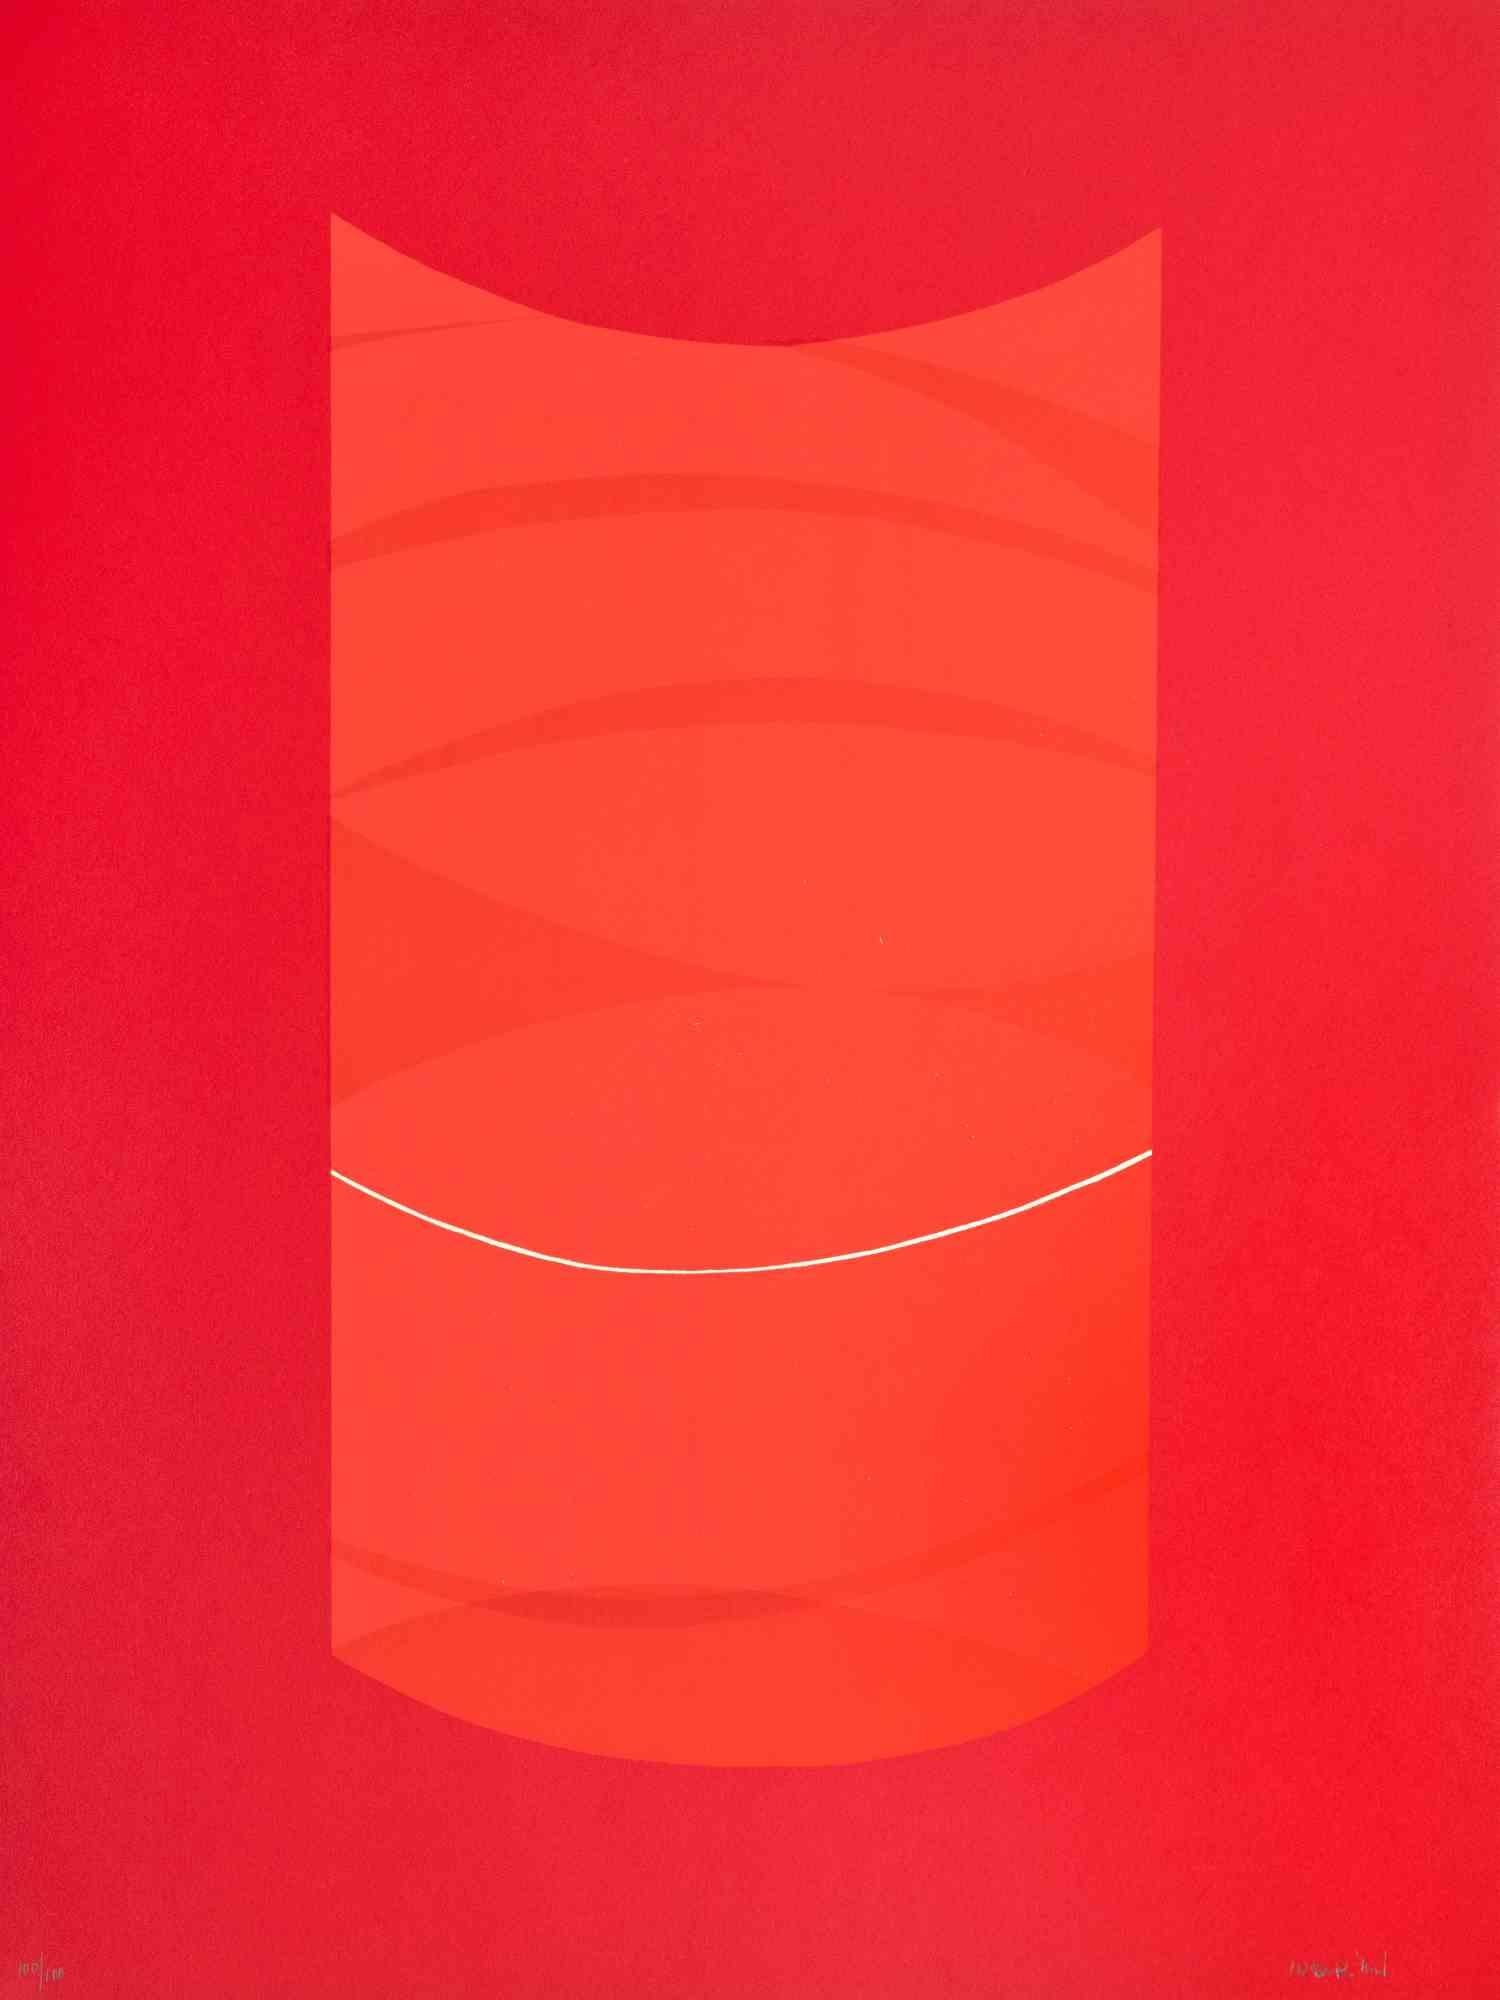 Red One - Lithograph by Lorenzo Indrimi - 1970s